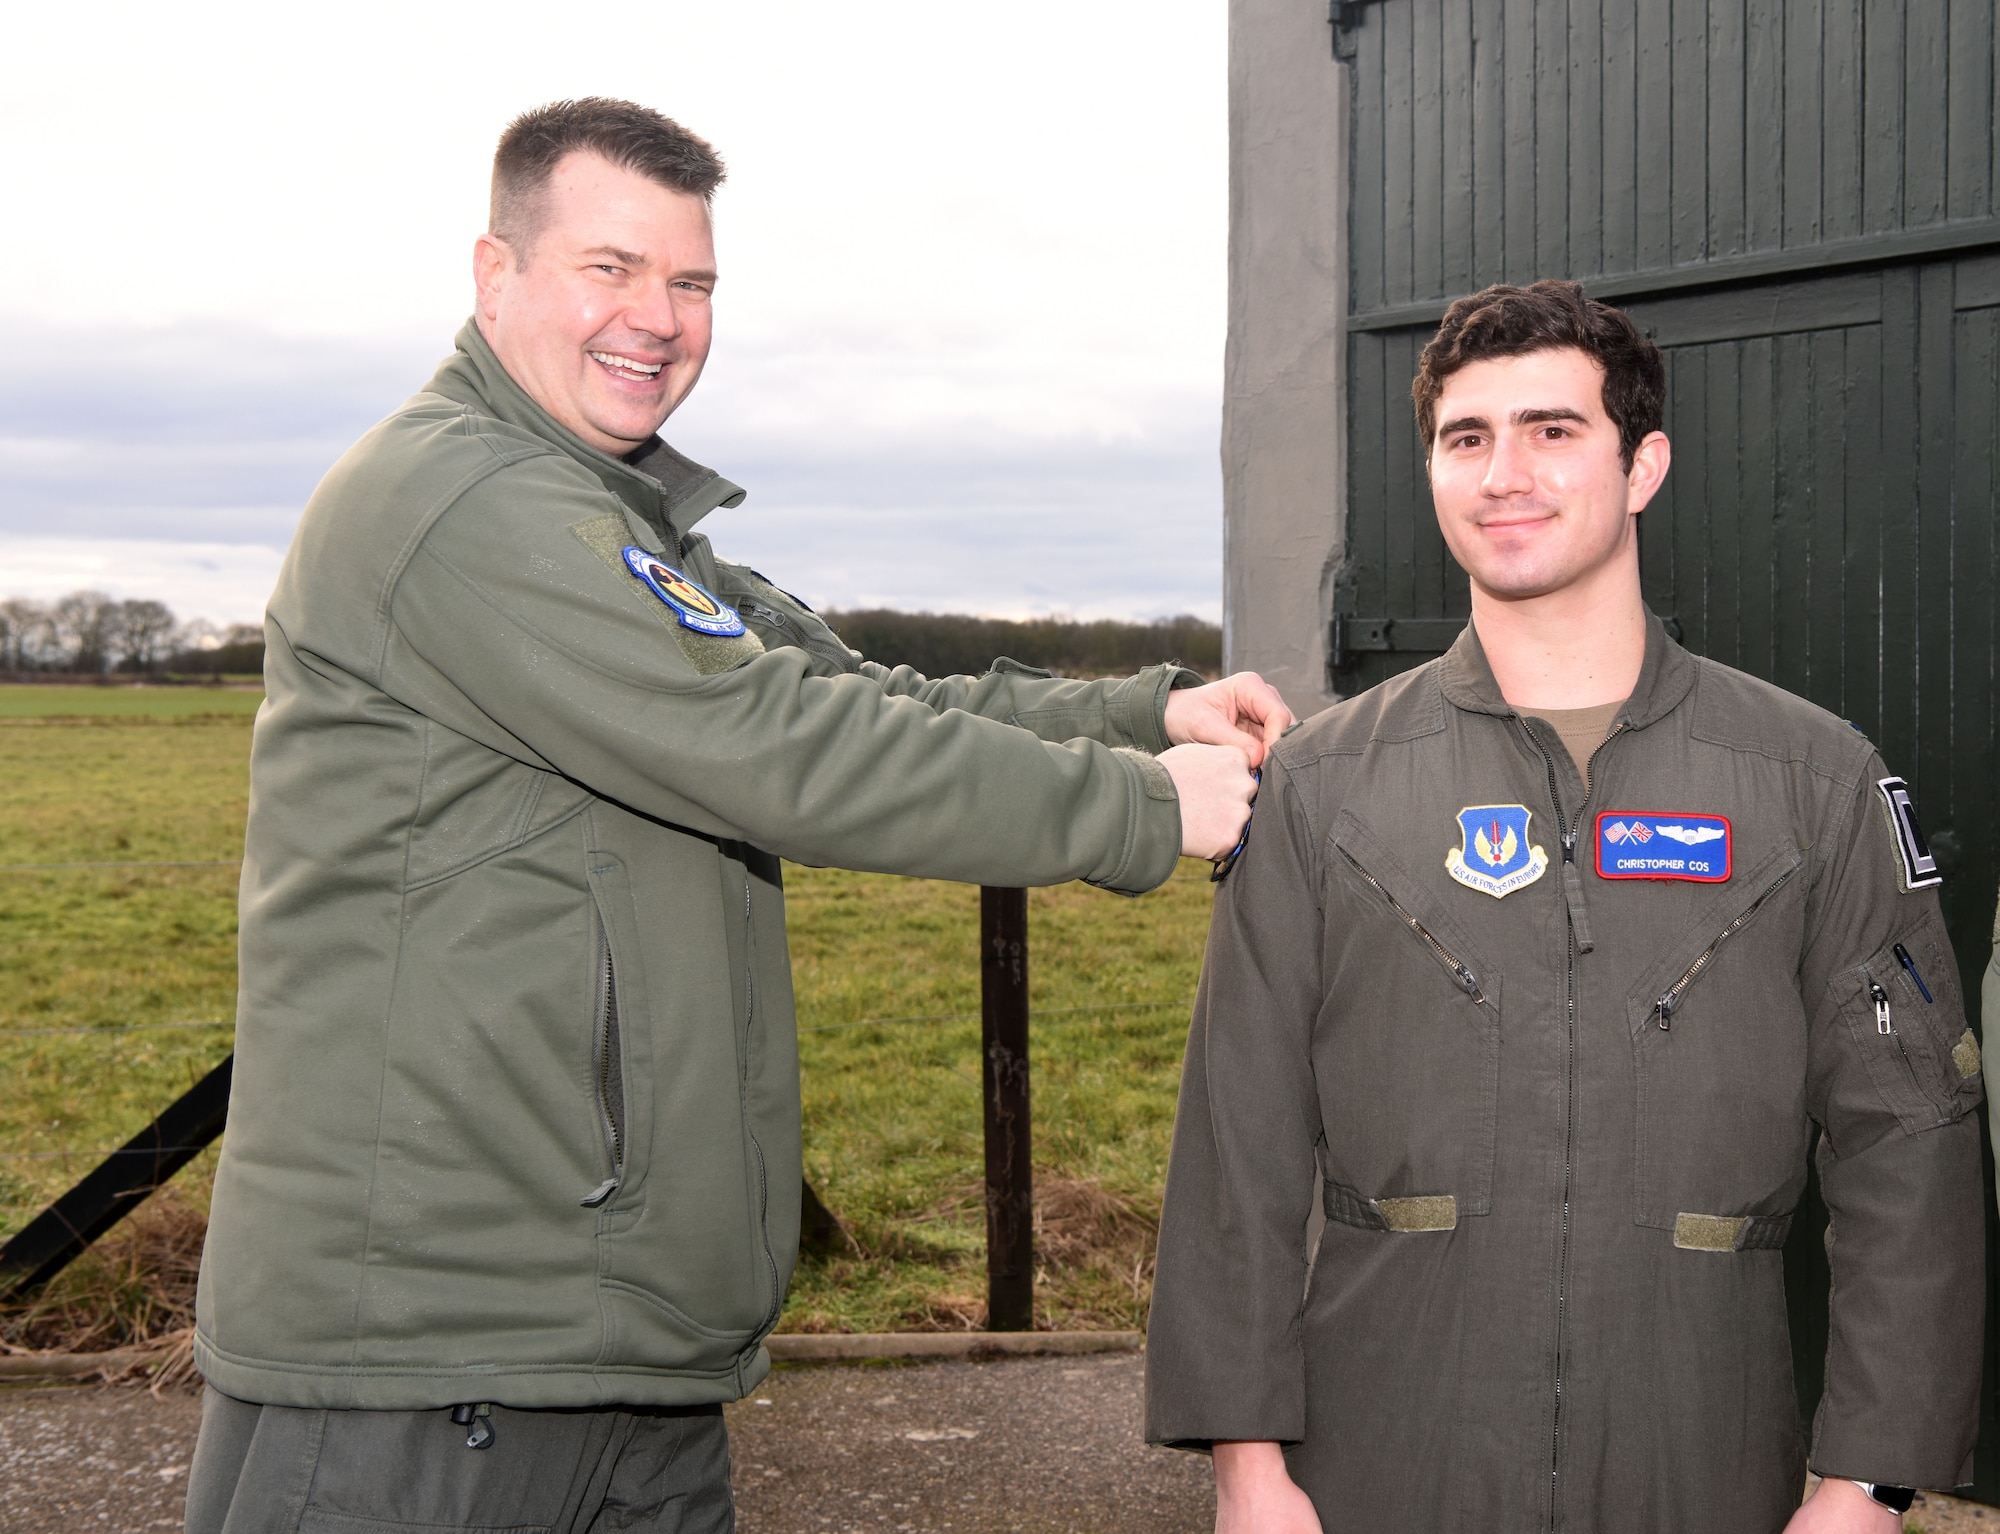 U.S. Air Force Lt. Col. Tyler Berge, left, 351st Air Refueling Squadron commander, presents the squadron heritage “Buzzard” patch to 1st Lt. Christopher Cos, 351st ARS co-pilot, at the 100th Bomb Group Memorial Museum, Thorpe Abbotts, England, Feb. 2, 2023. The heritage patch is presented to pilots and boom operators who have completed mission certification training. Thorpe Abbotts was home to the original 351st Bomb Squadron and 100th Bomb group during World War II. (U.S. Air Force photo by Karen Abeyasekere)